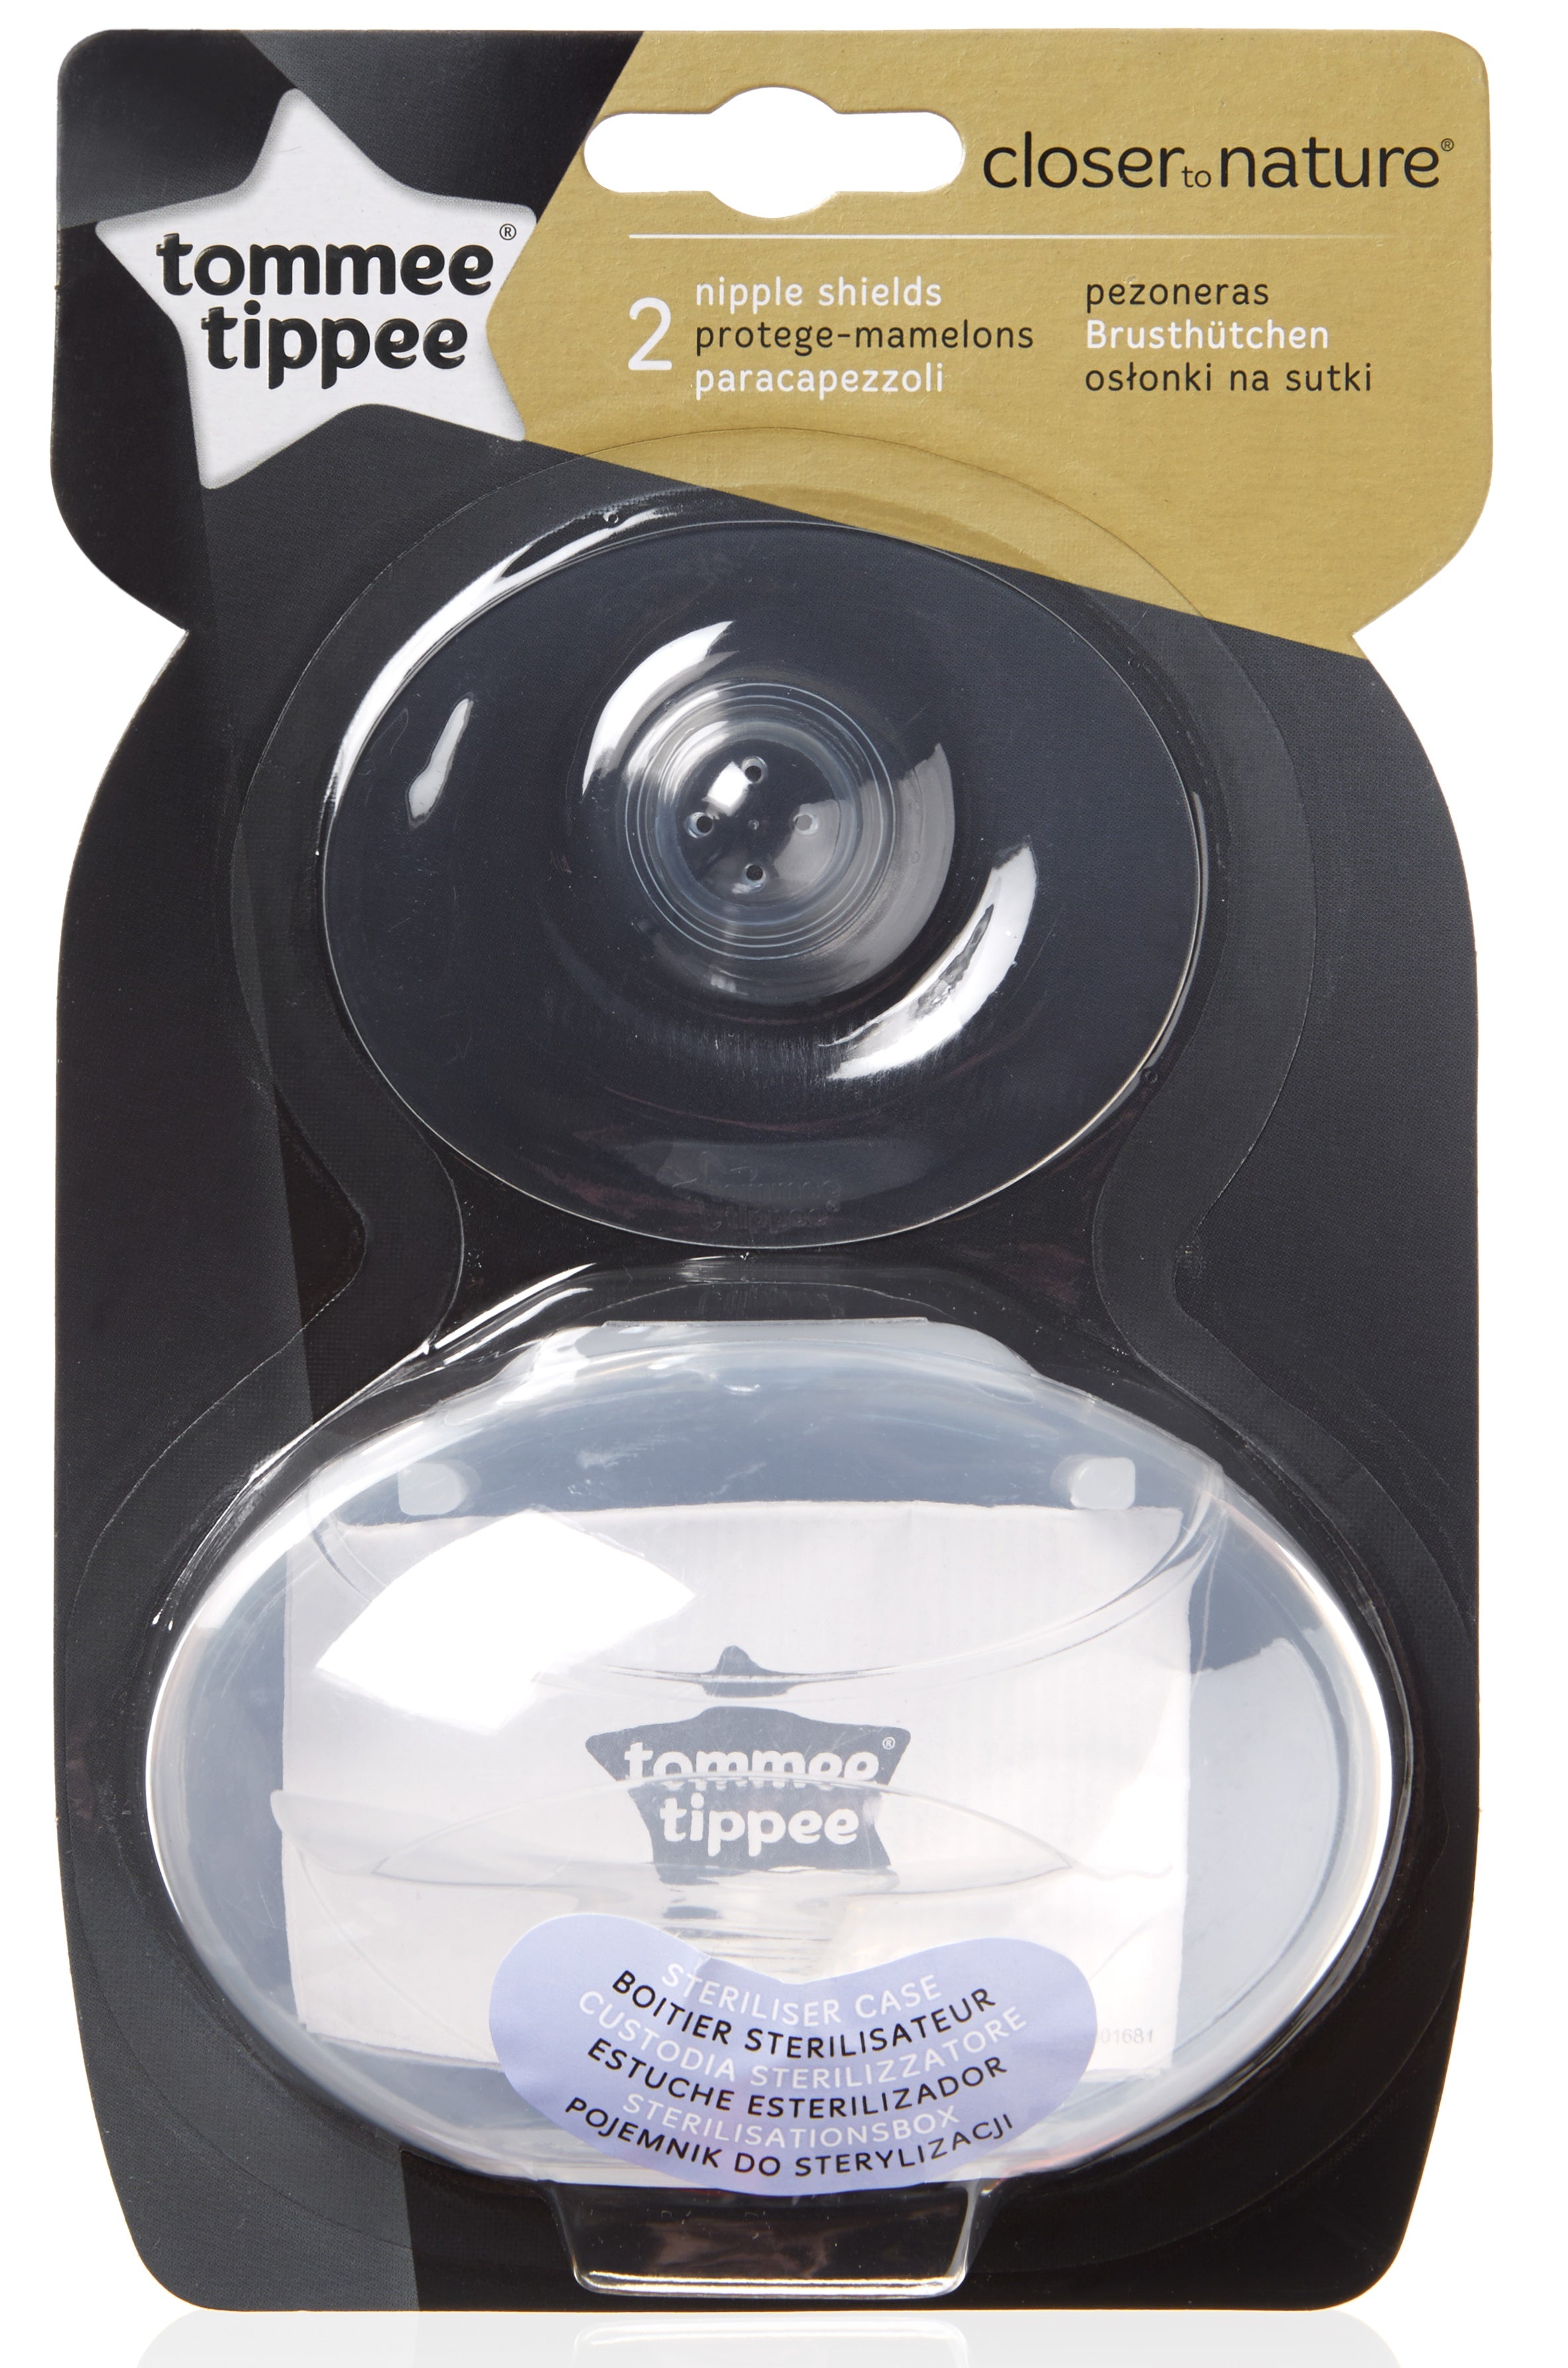 Tommee Tippee Closer to Nature Nipple Shieldsx 2 with Sterilizer Case